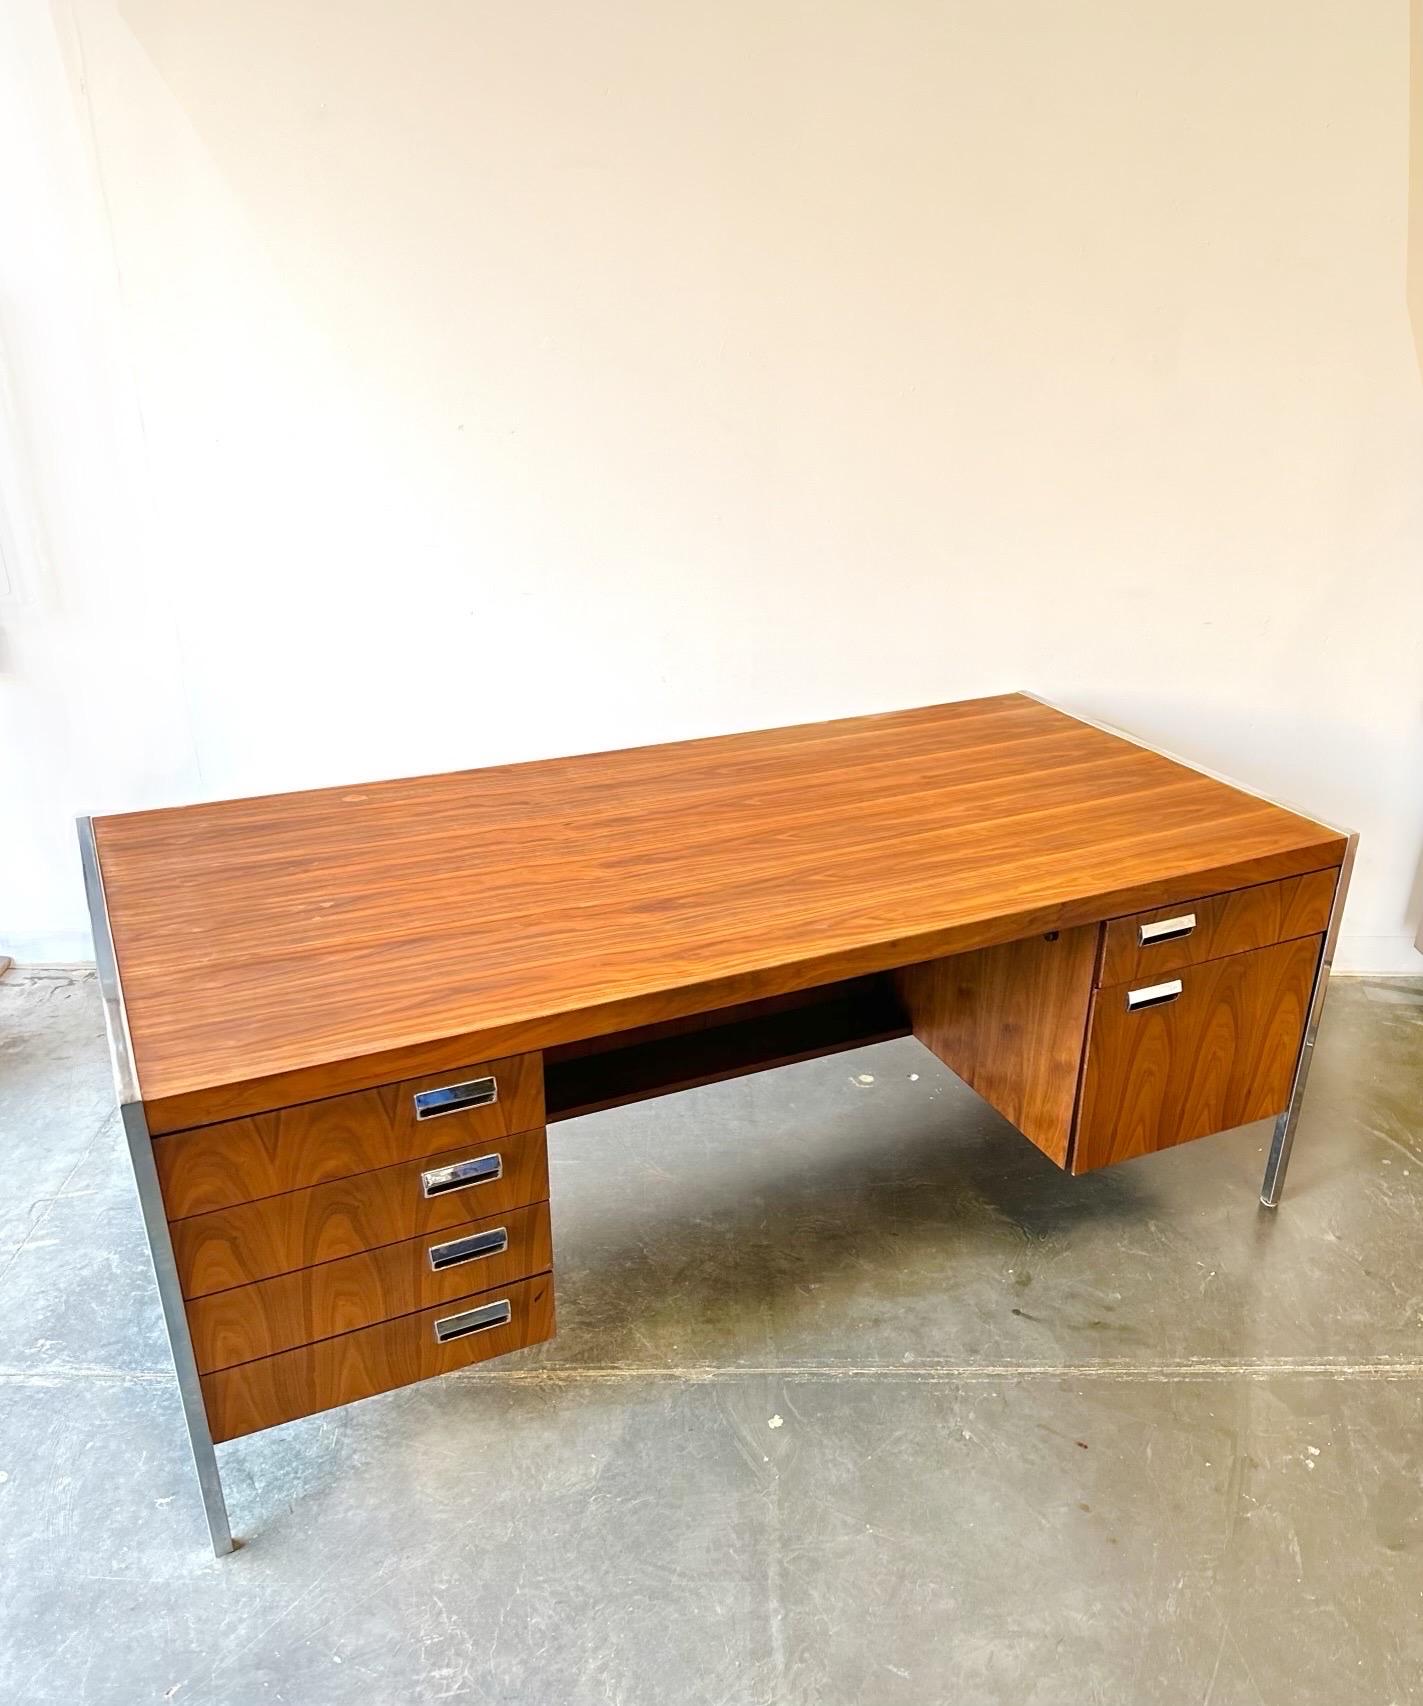 Gorgeous walnut and chrome executive office desk.

In the manner of a Florence knoll design this piece is in great condition with a refinished top.